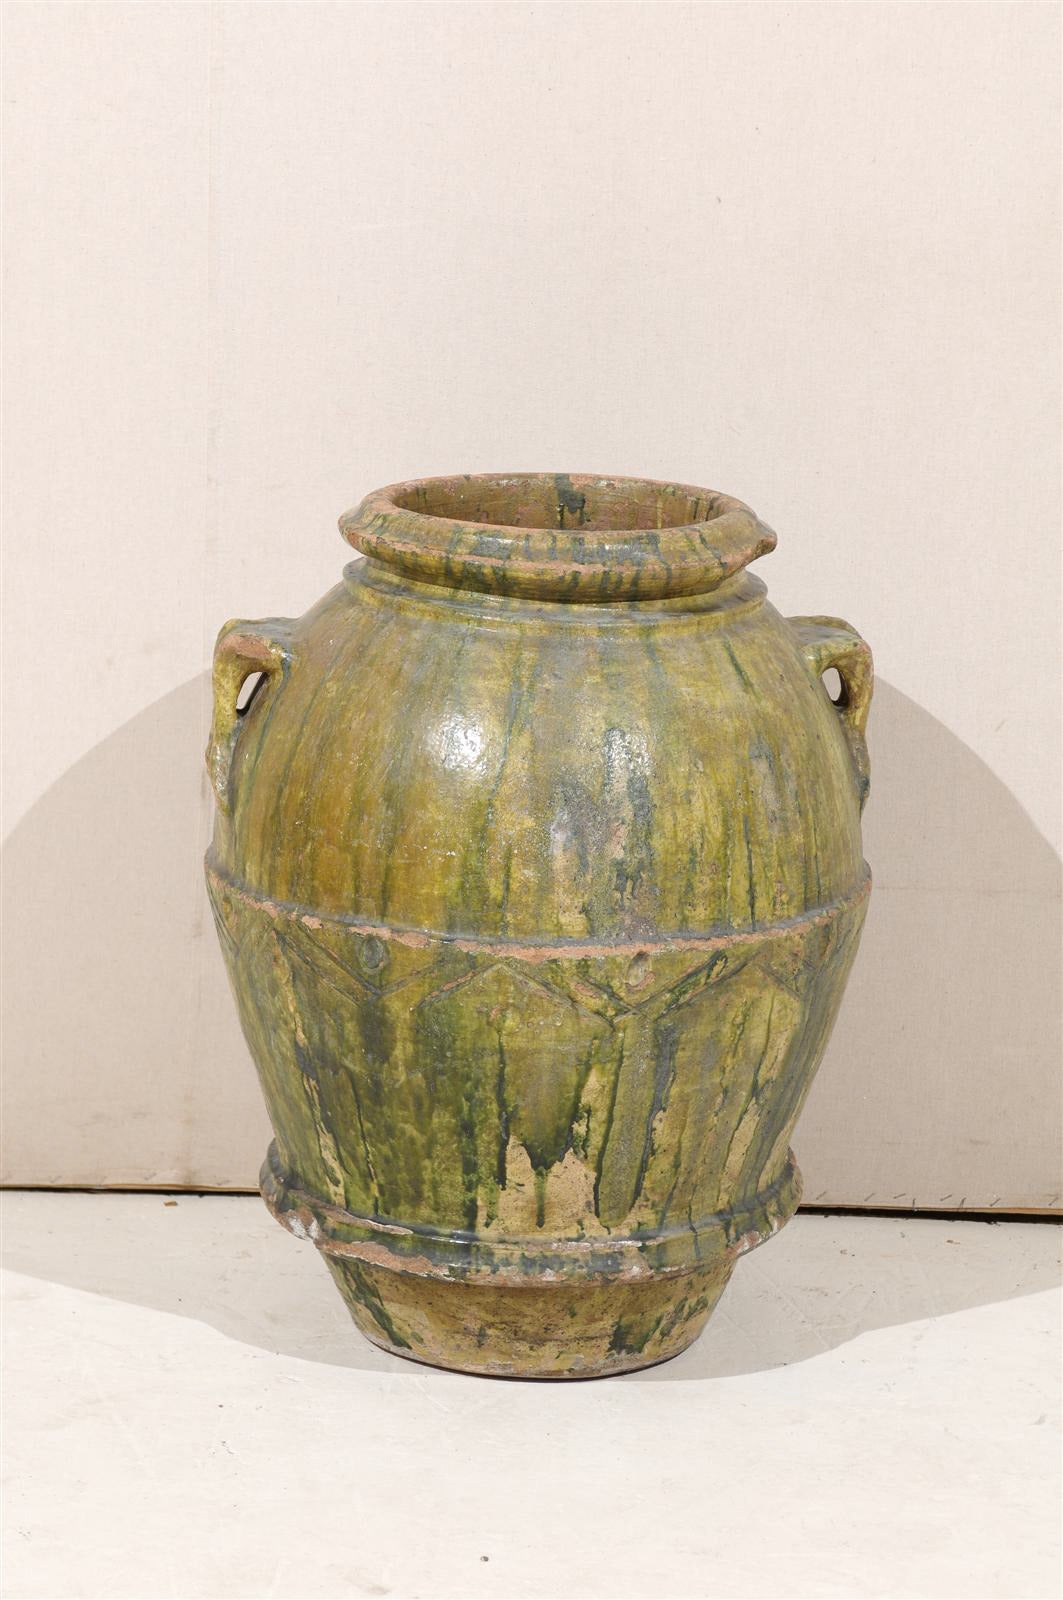 A large Italian 18th century green glazed terracotta double handled jar. This Italian jar features rich green paint of dark and light tones that have a poured effect over the jar. This large Italian jar also has some nice repeating triangular